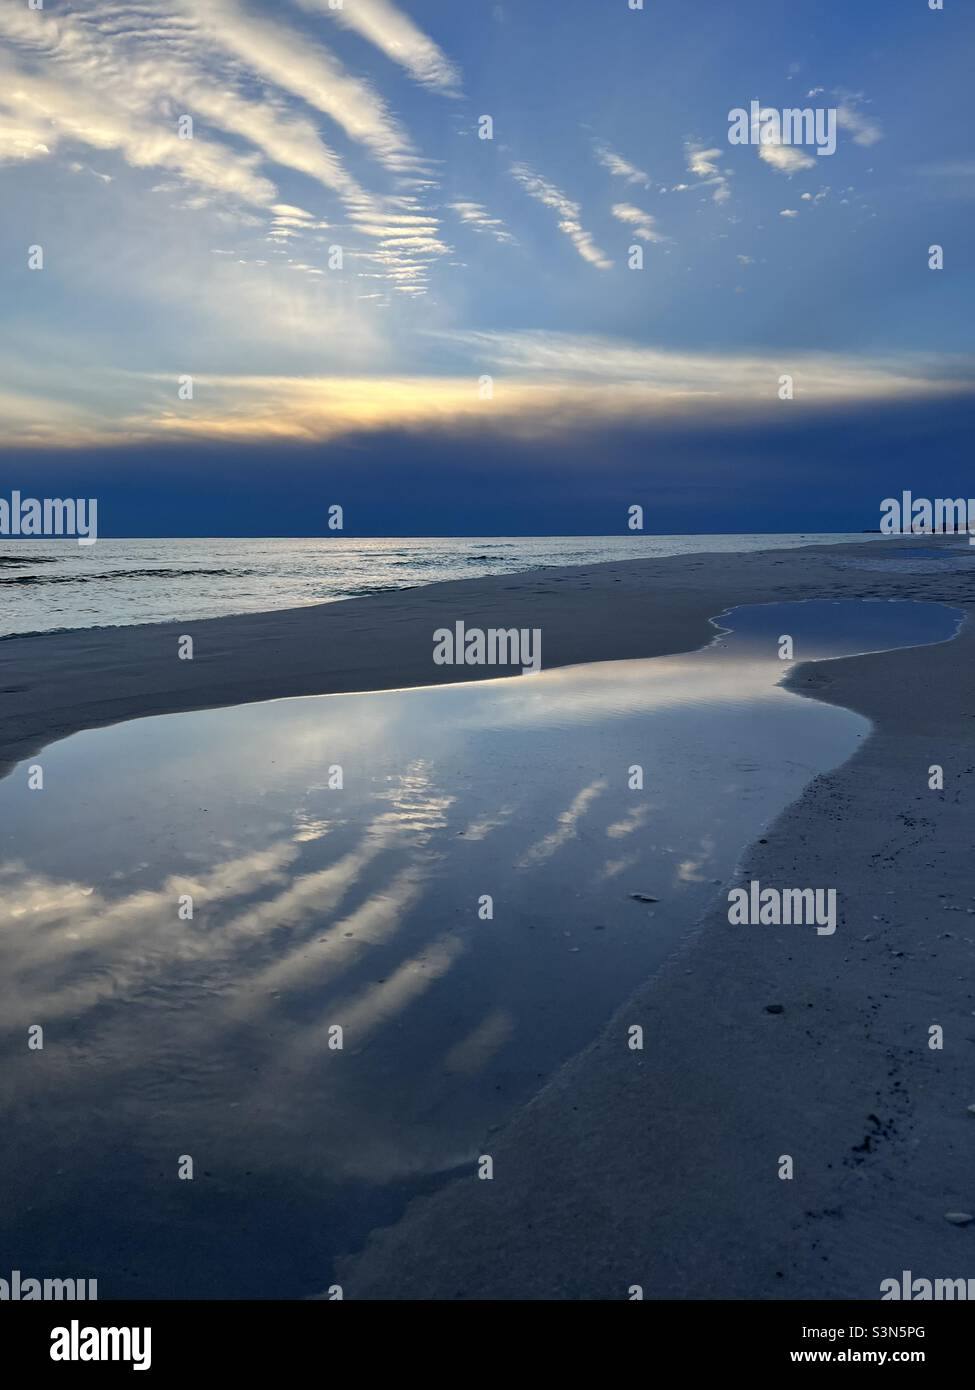 Dramatic sunset with cloud reflections onto beach sand Stock Photo